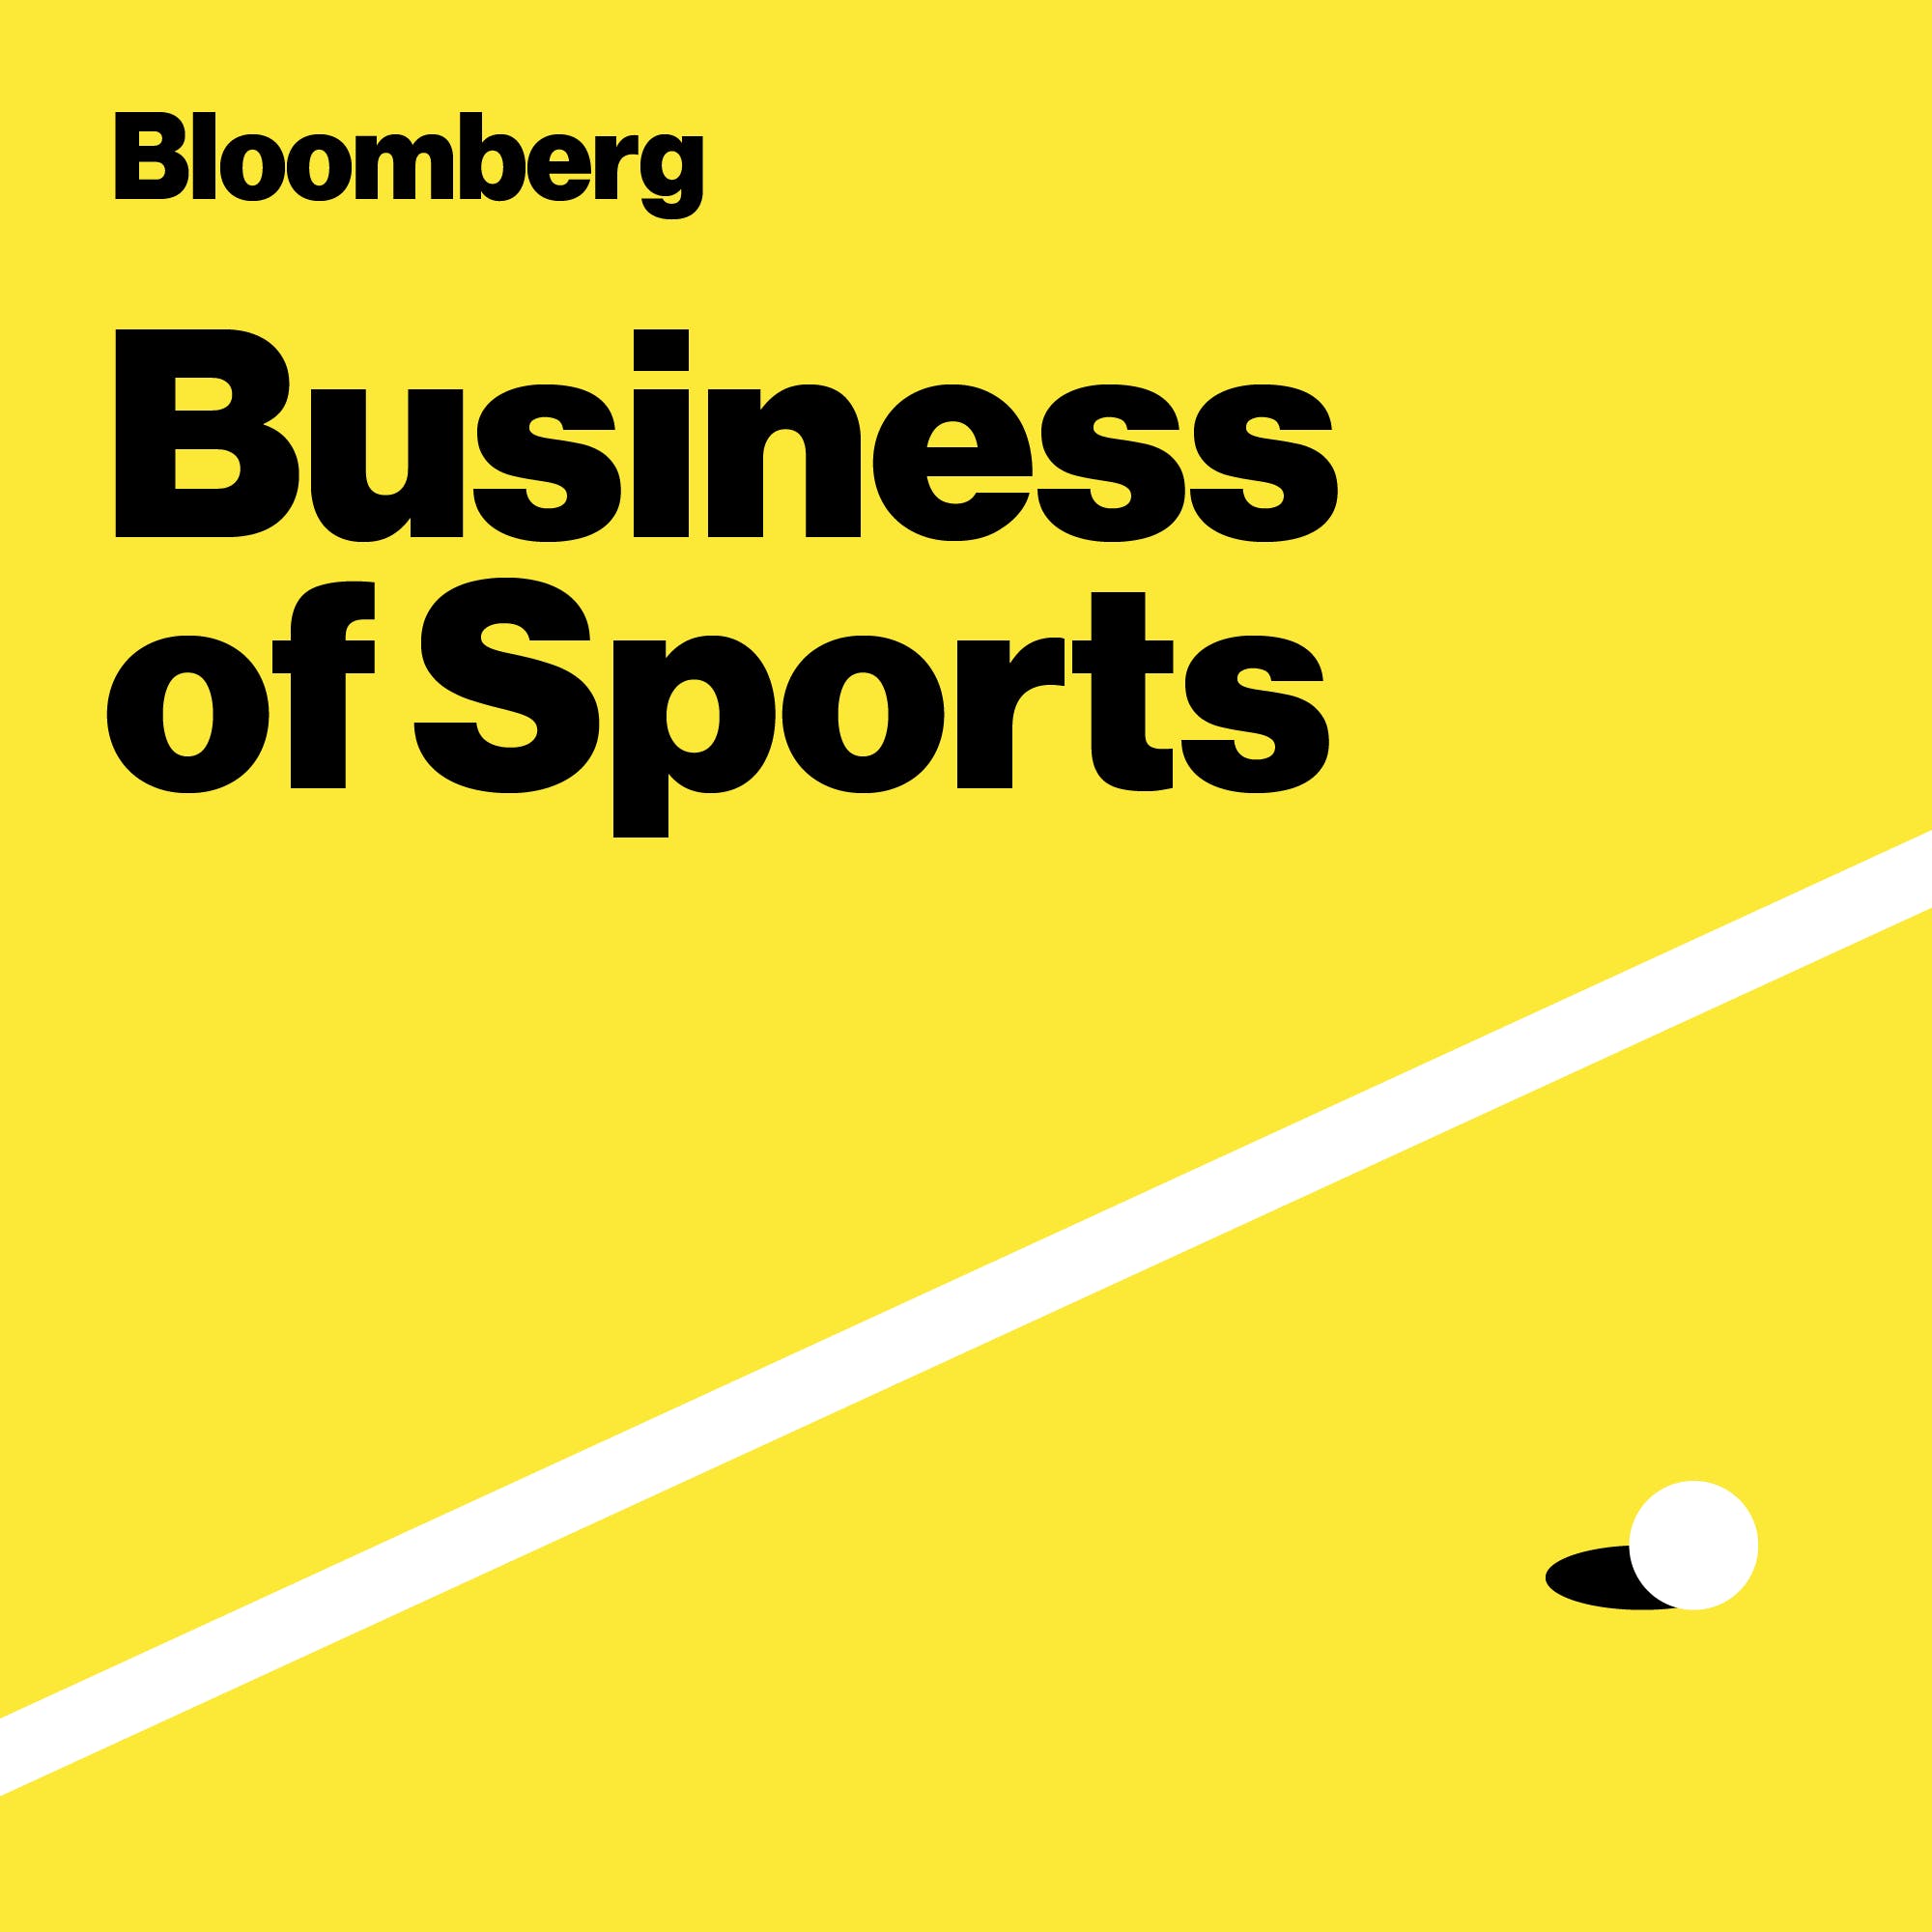 Soccer Equity, Golf Controversy and Coach K Pay Day